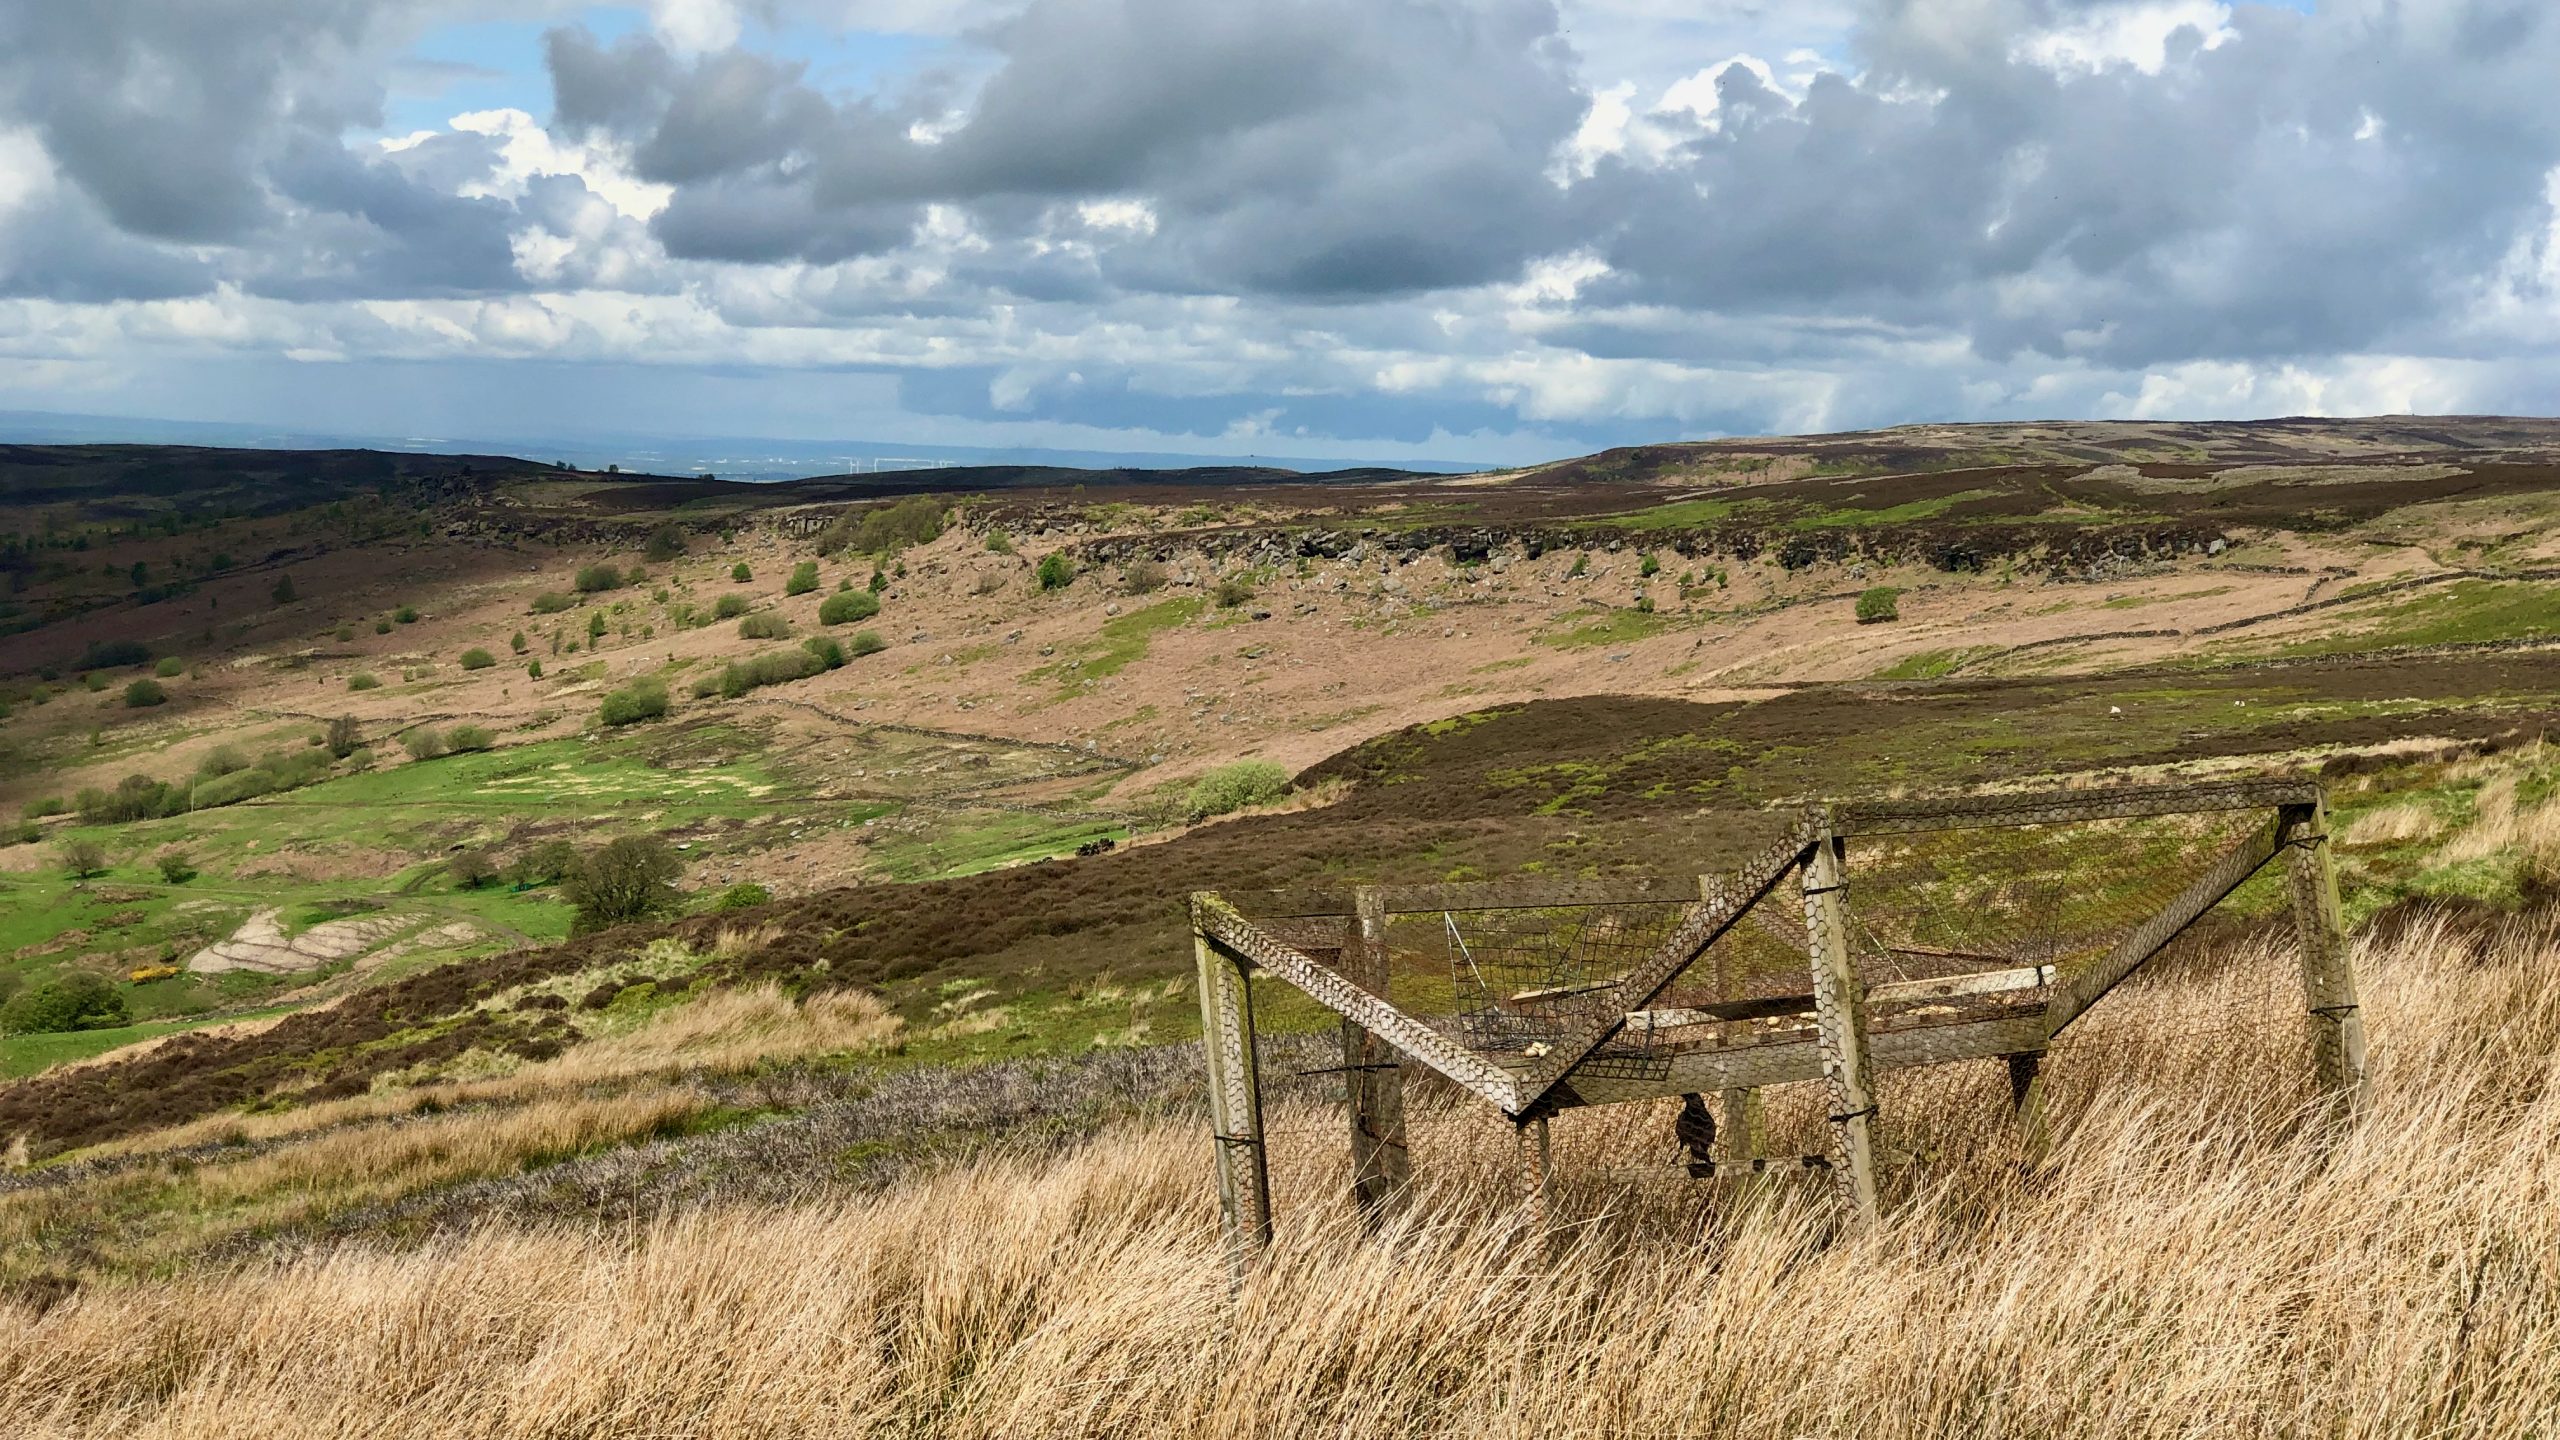 View across the head of a moorland dale with a ladder trap in the foreground containing to live crows.